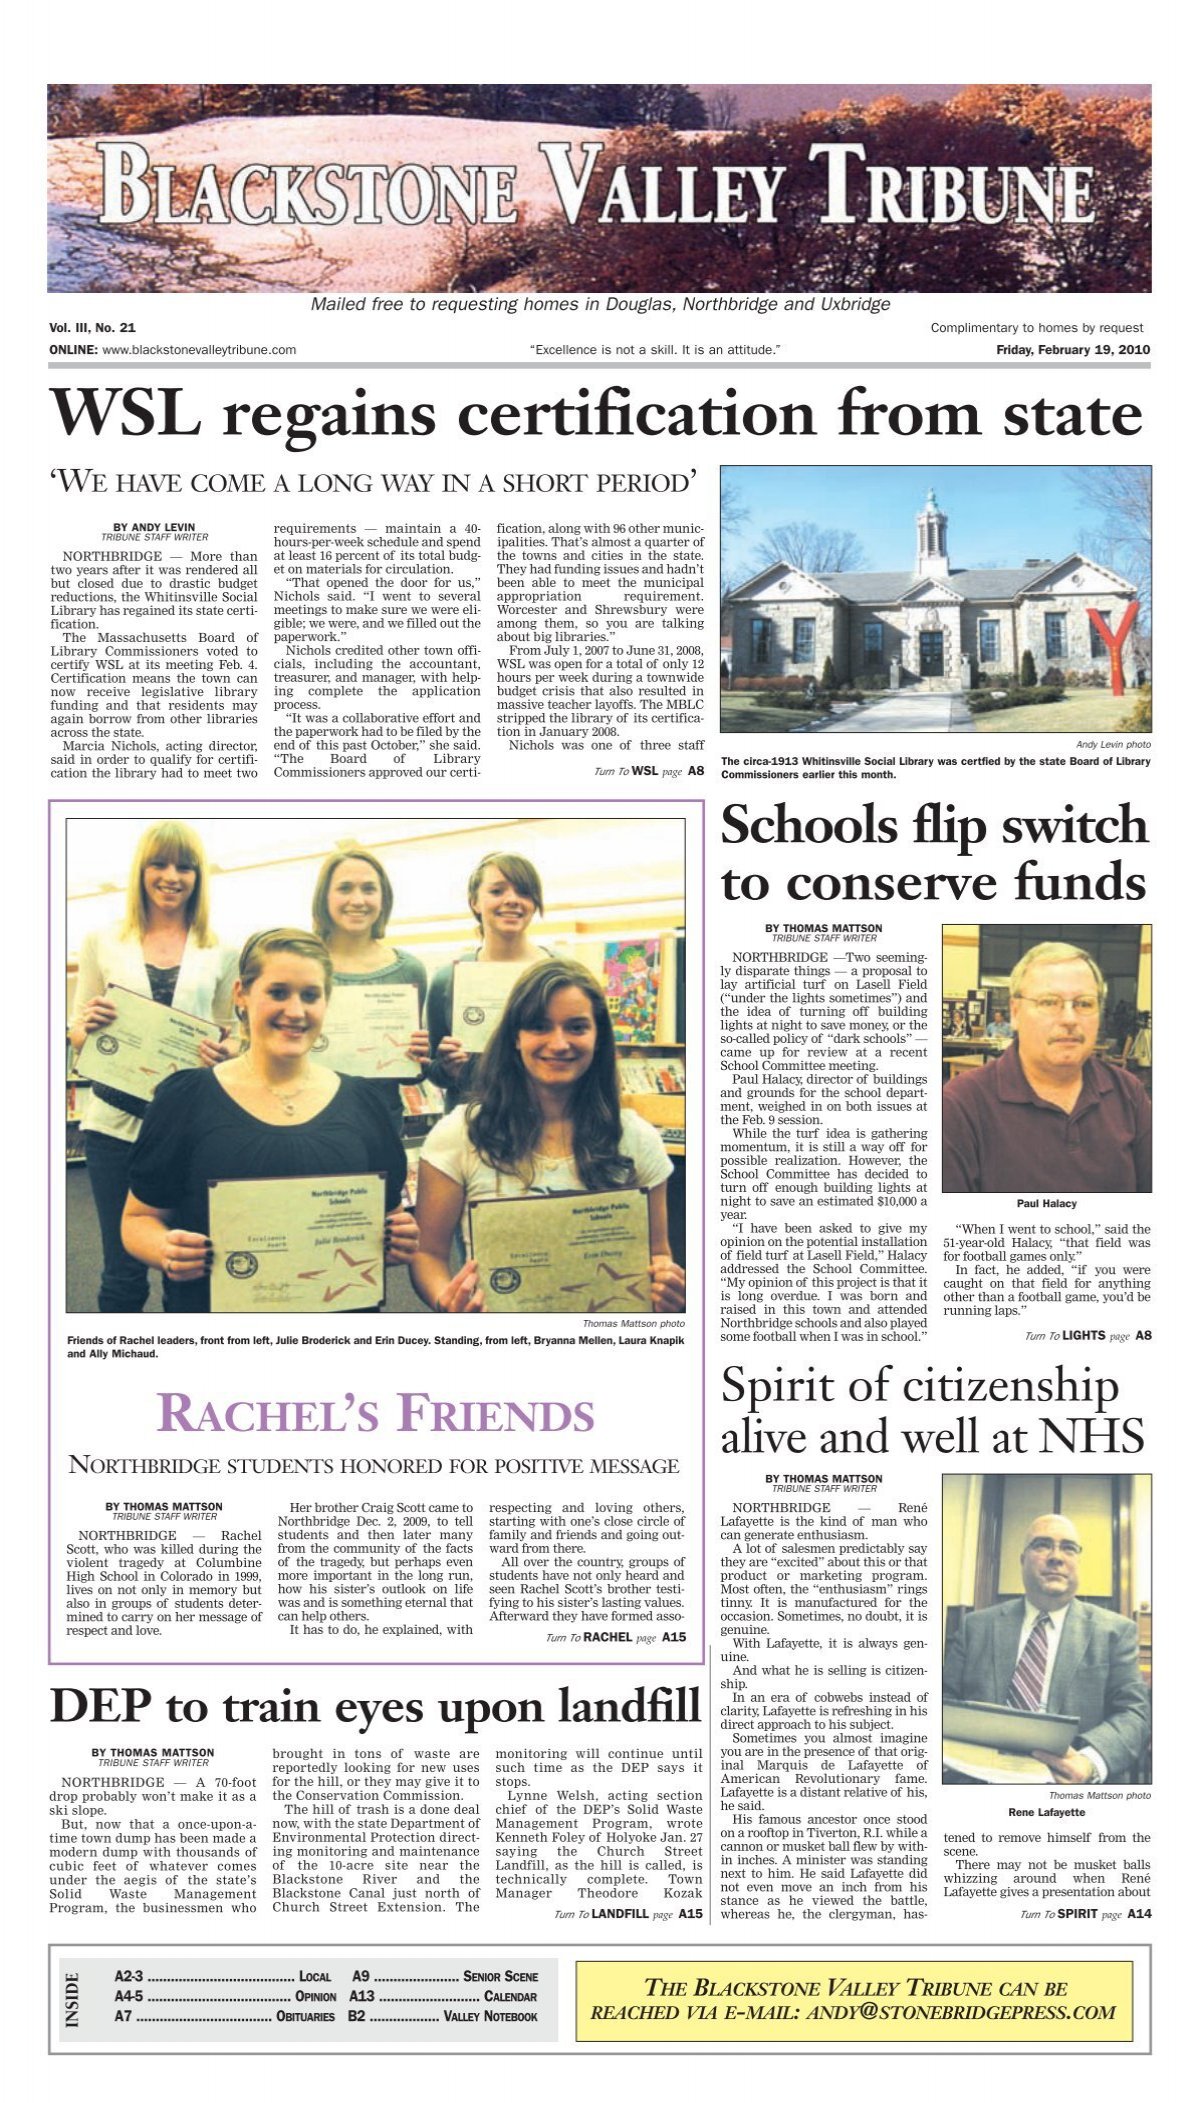 WSL regains certification from state Southbridge News Evening 